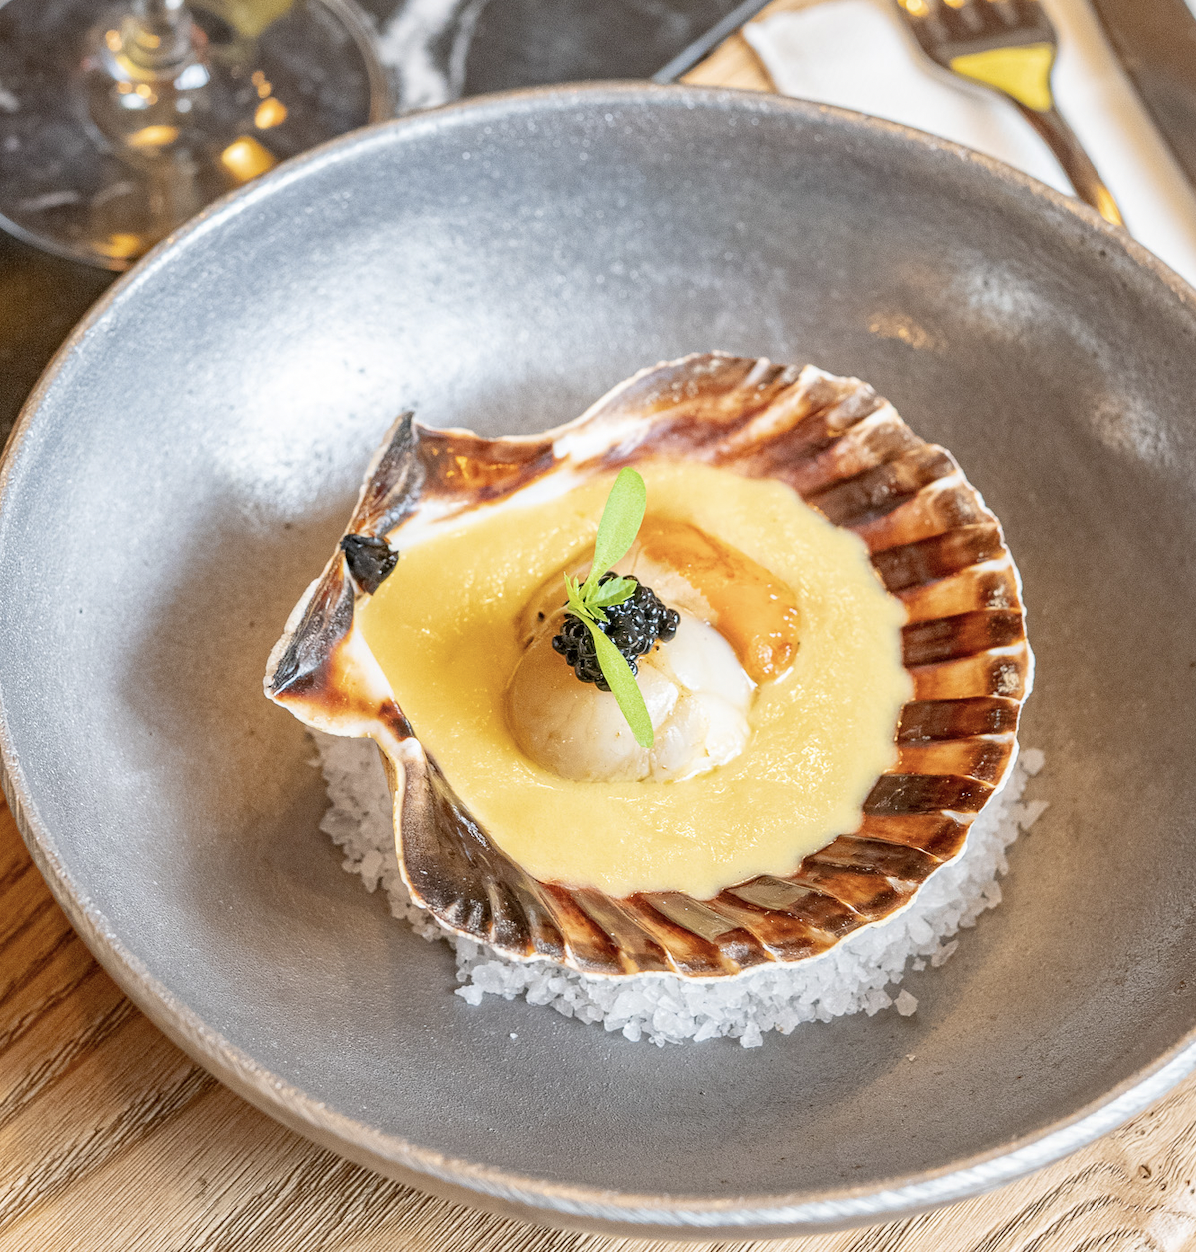 Scallop with passion fruit curry